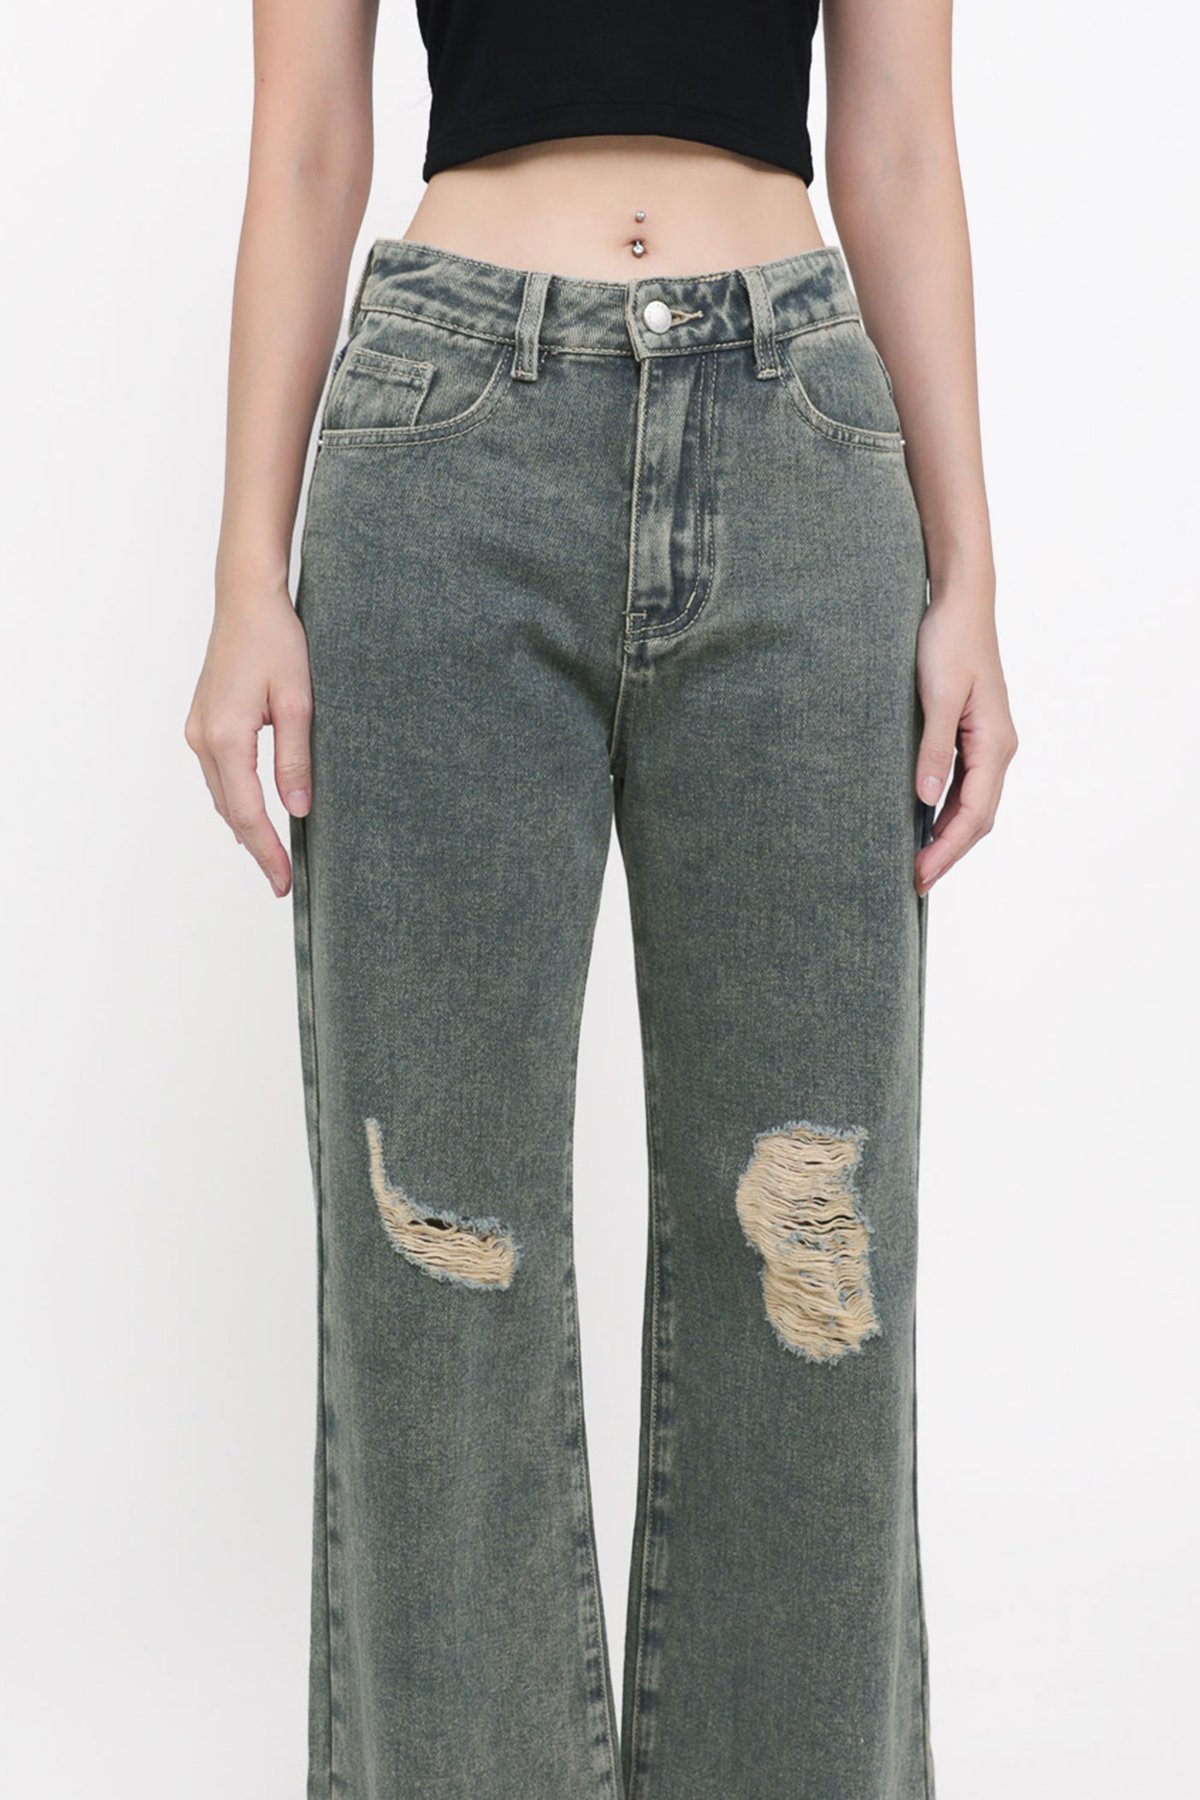 Braven Ripped Baggy Jeans (Vintage Wash)